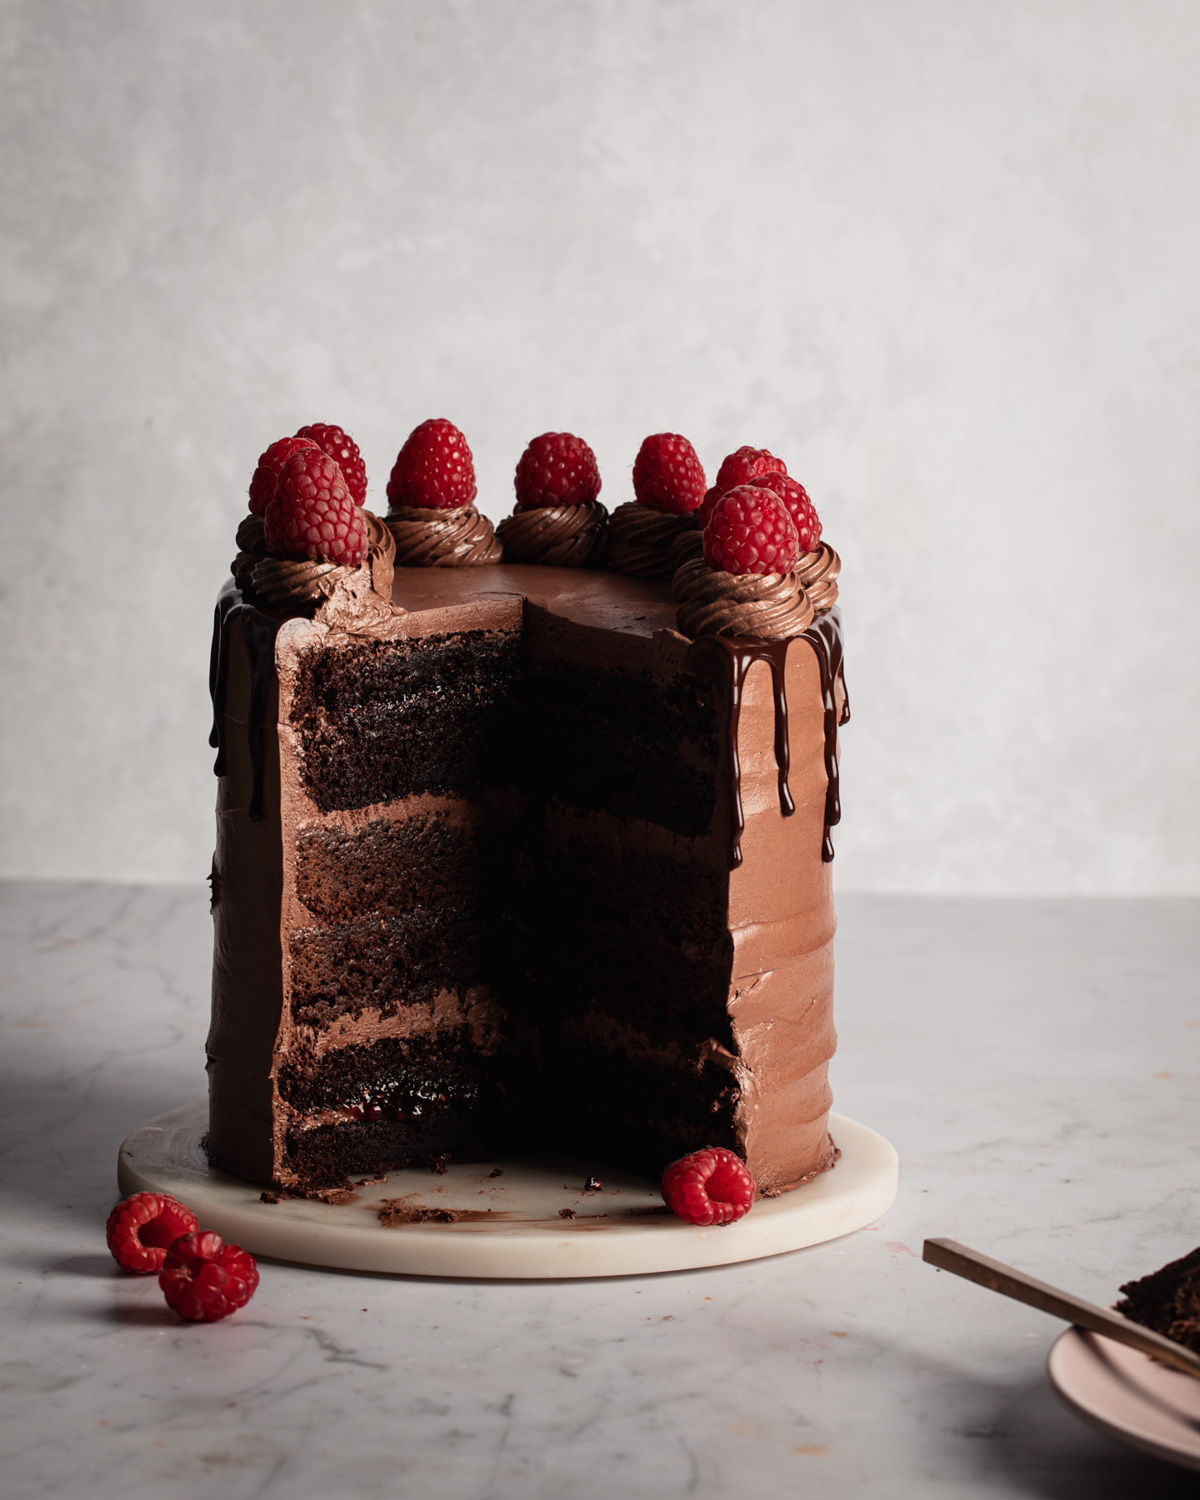 A Nutella cake with brownie and chocolate cake layers and raspberry jam